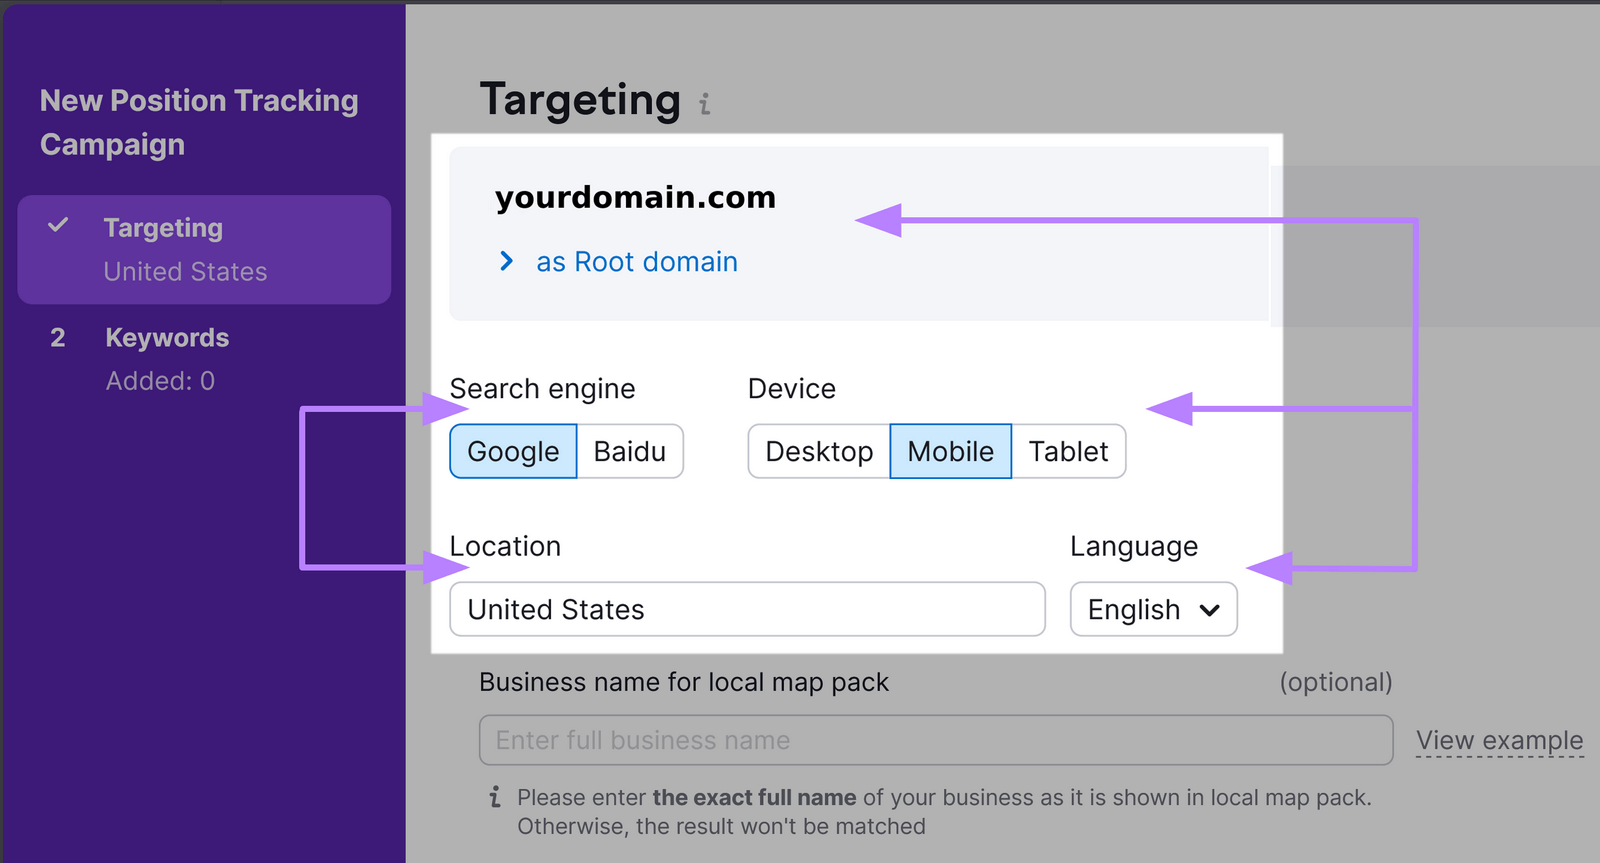 "Targeting" settings in Position Tracking